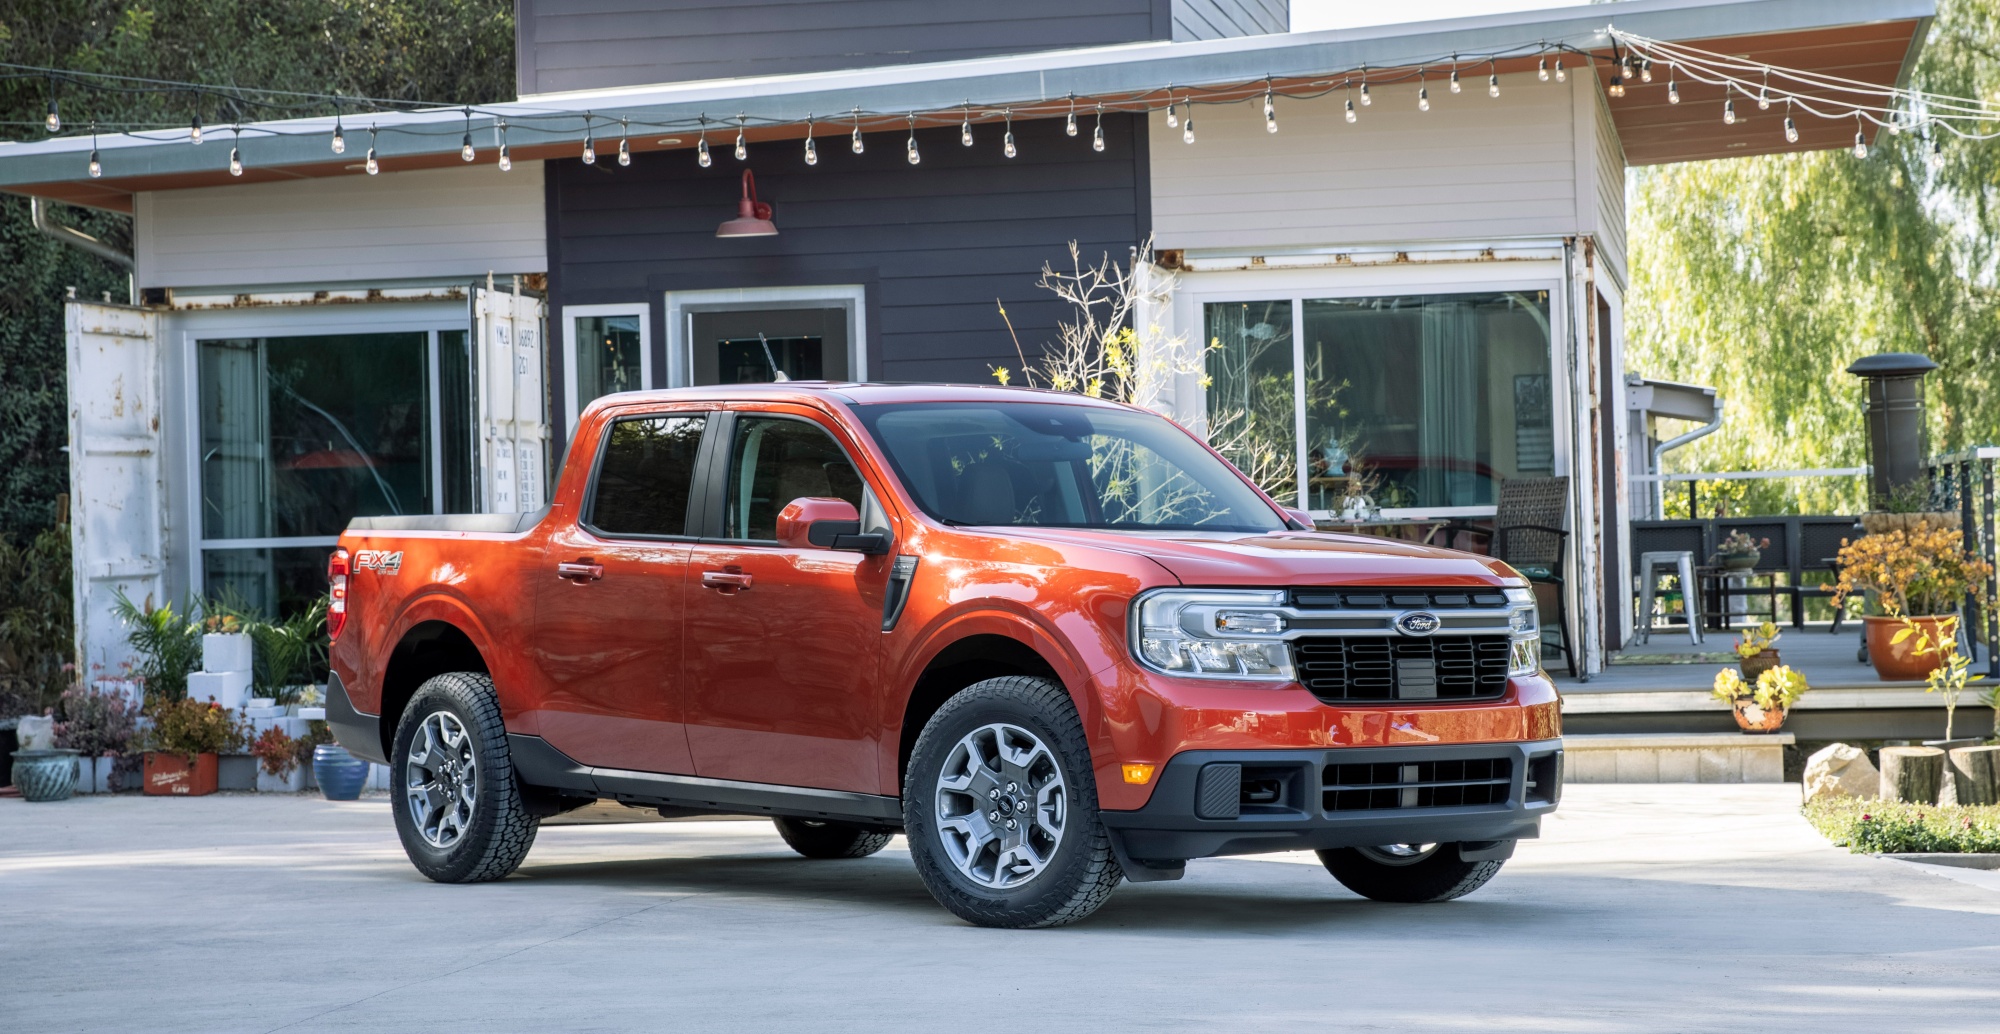 Upcoming Compact Pickups That Could Threaten The Ford Maverick's Dominance